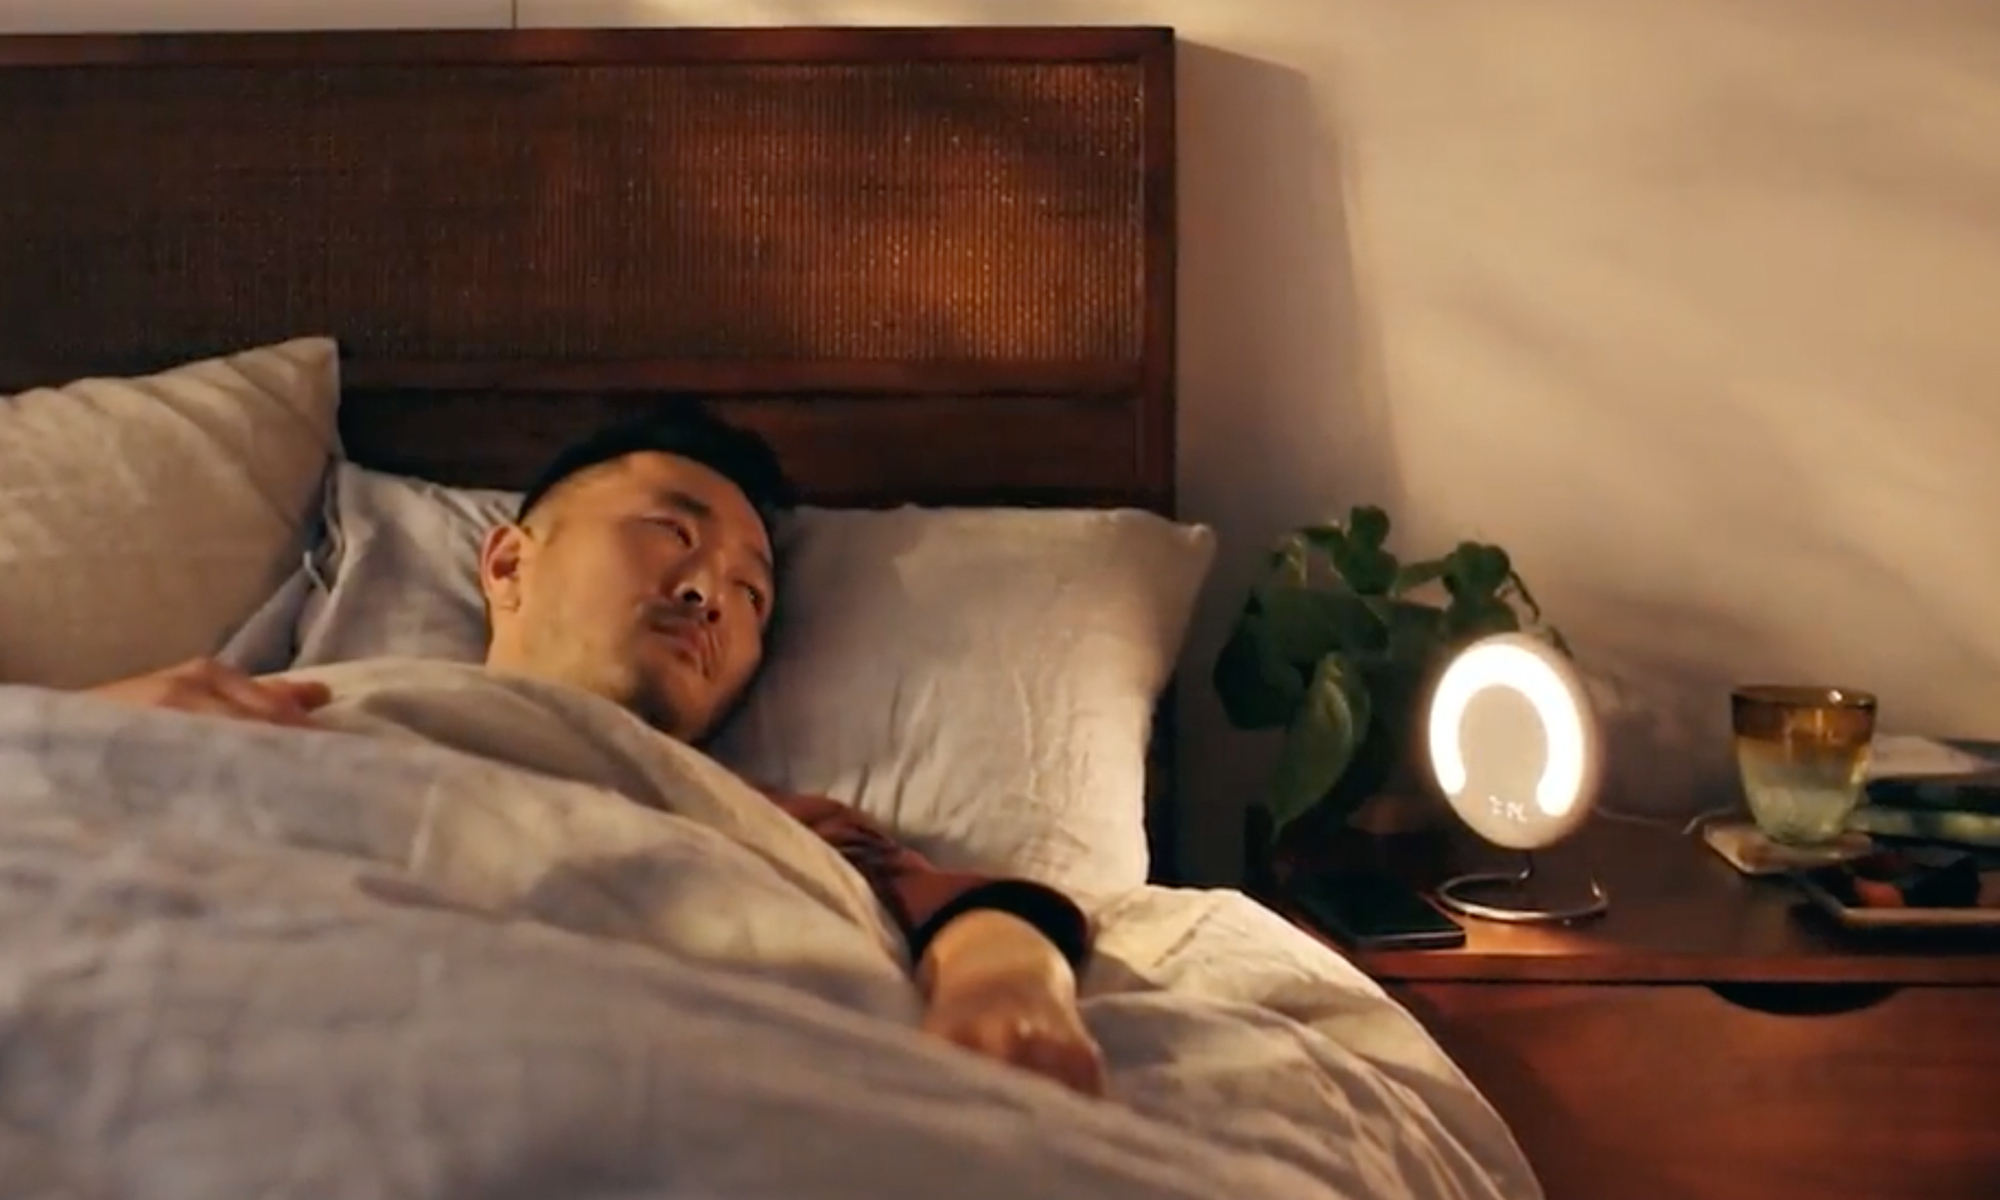 Amazon’s Halo Rise is a $140 bedside sleep tracker that works by sensing you breathe